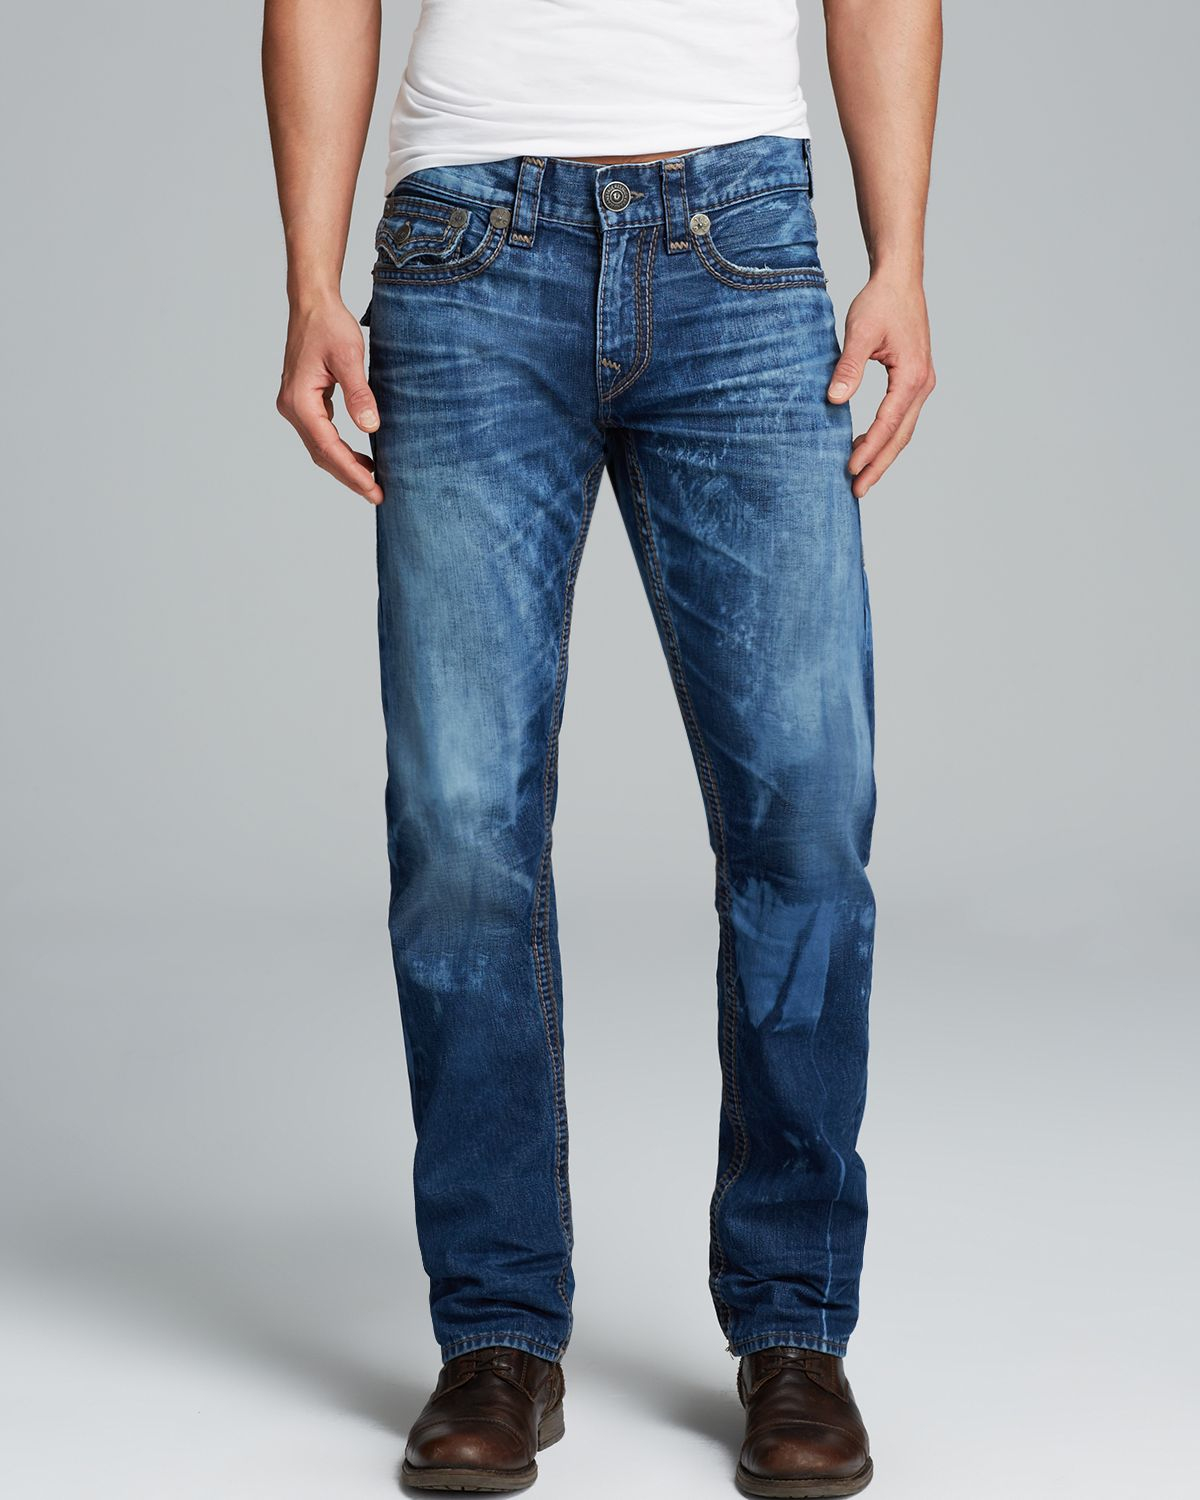 True Religion Jeans Ricky Big Qt Straight Fit in Bahm Road Blues in ...